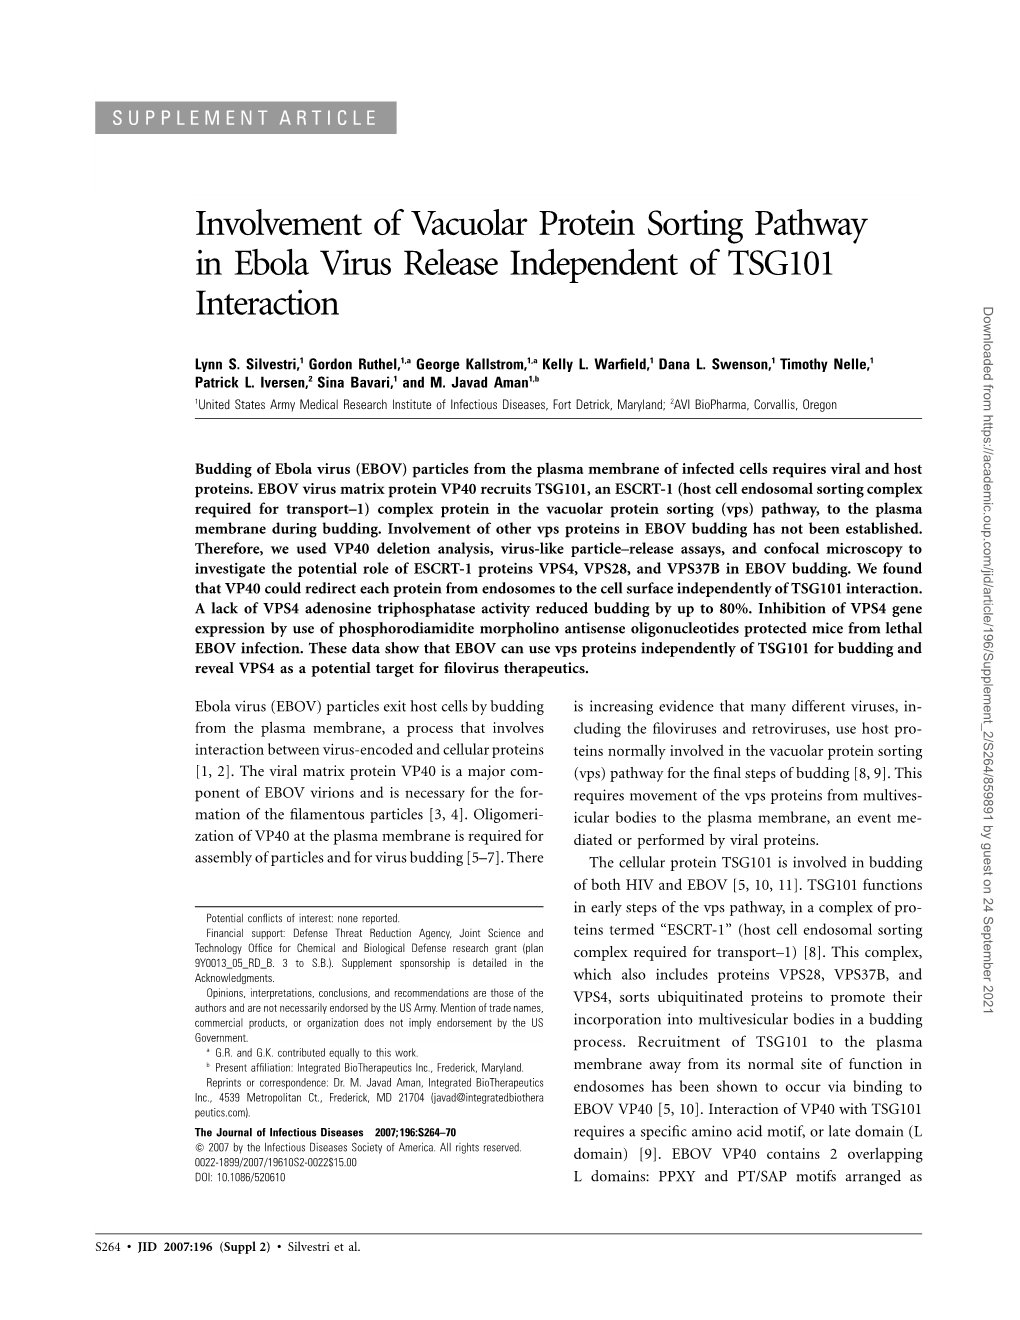 Involvement of Vacuolar Protein Sorting Pathway in Ebola Virus Release Independent of TSG101